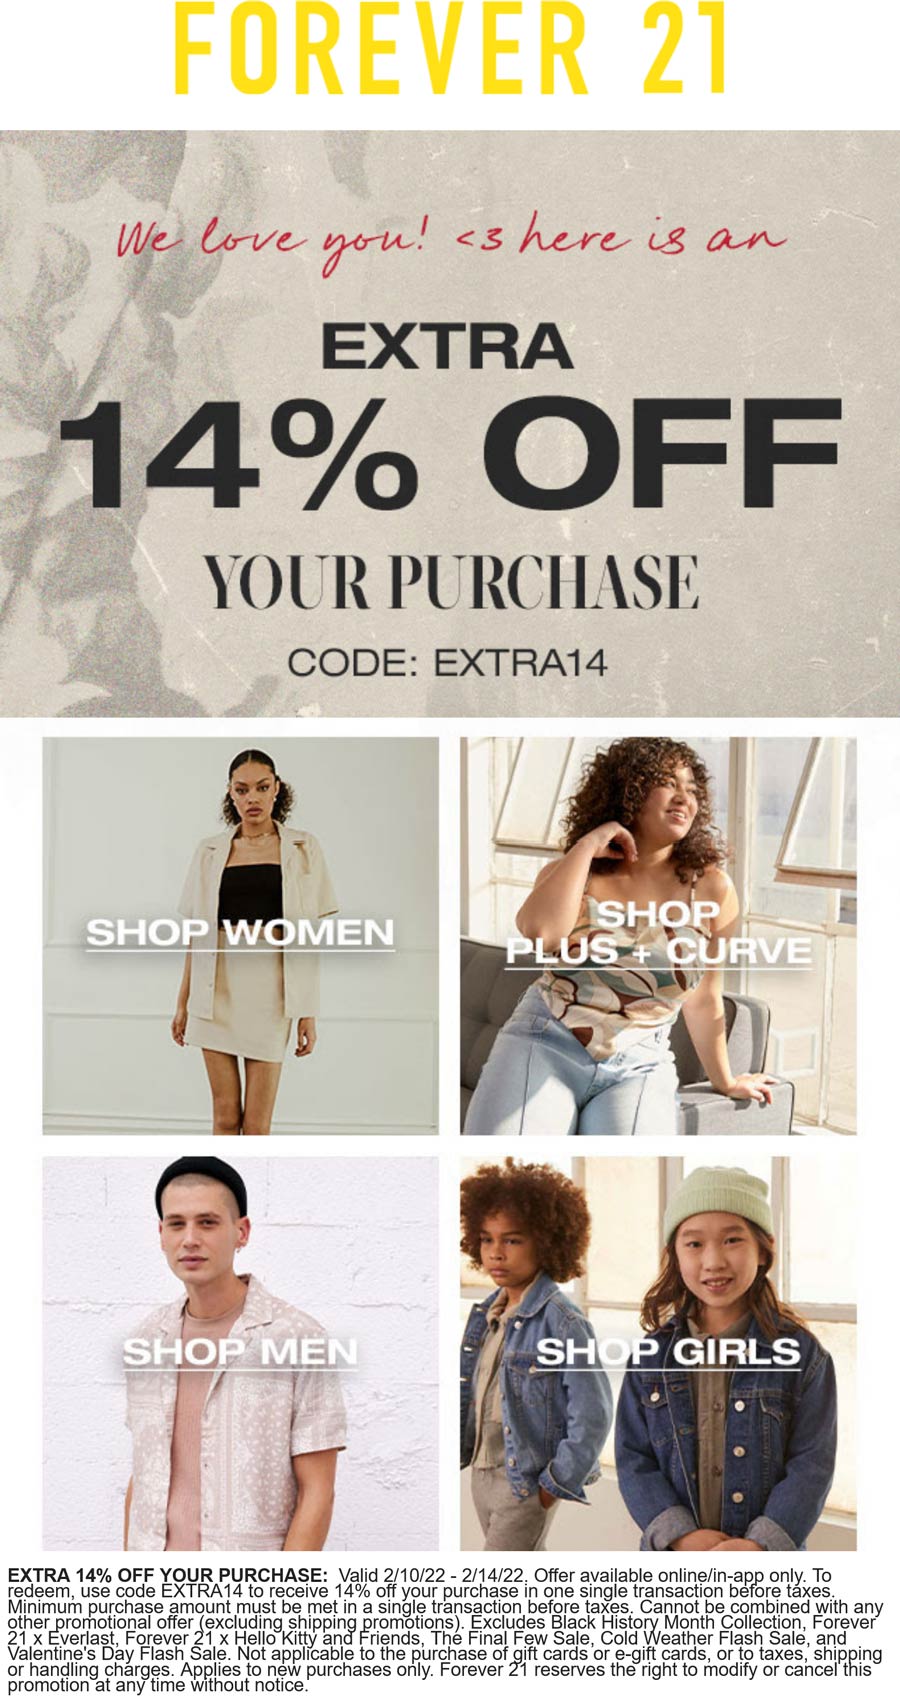 Forever 21 stores Coupon  Extra 14% off online at Forever 21 via promo code EXTRA14 #forever21 